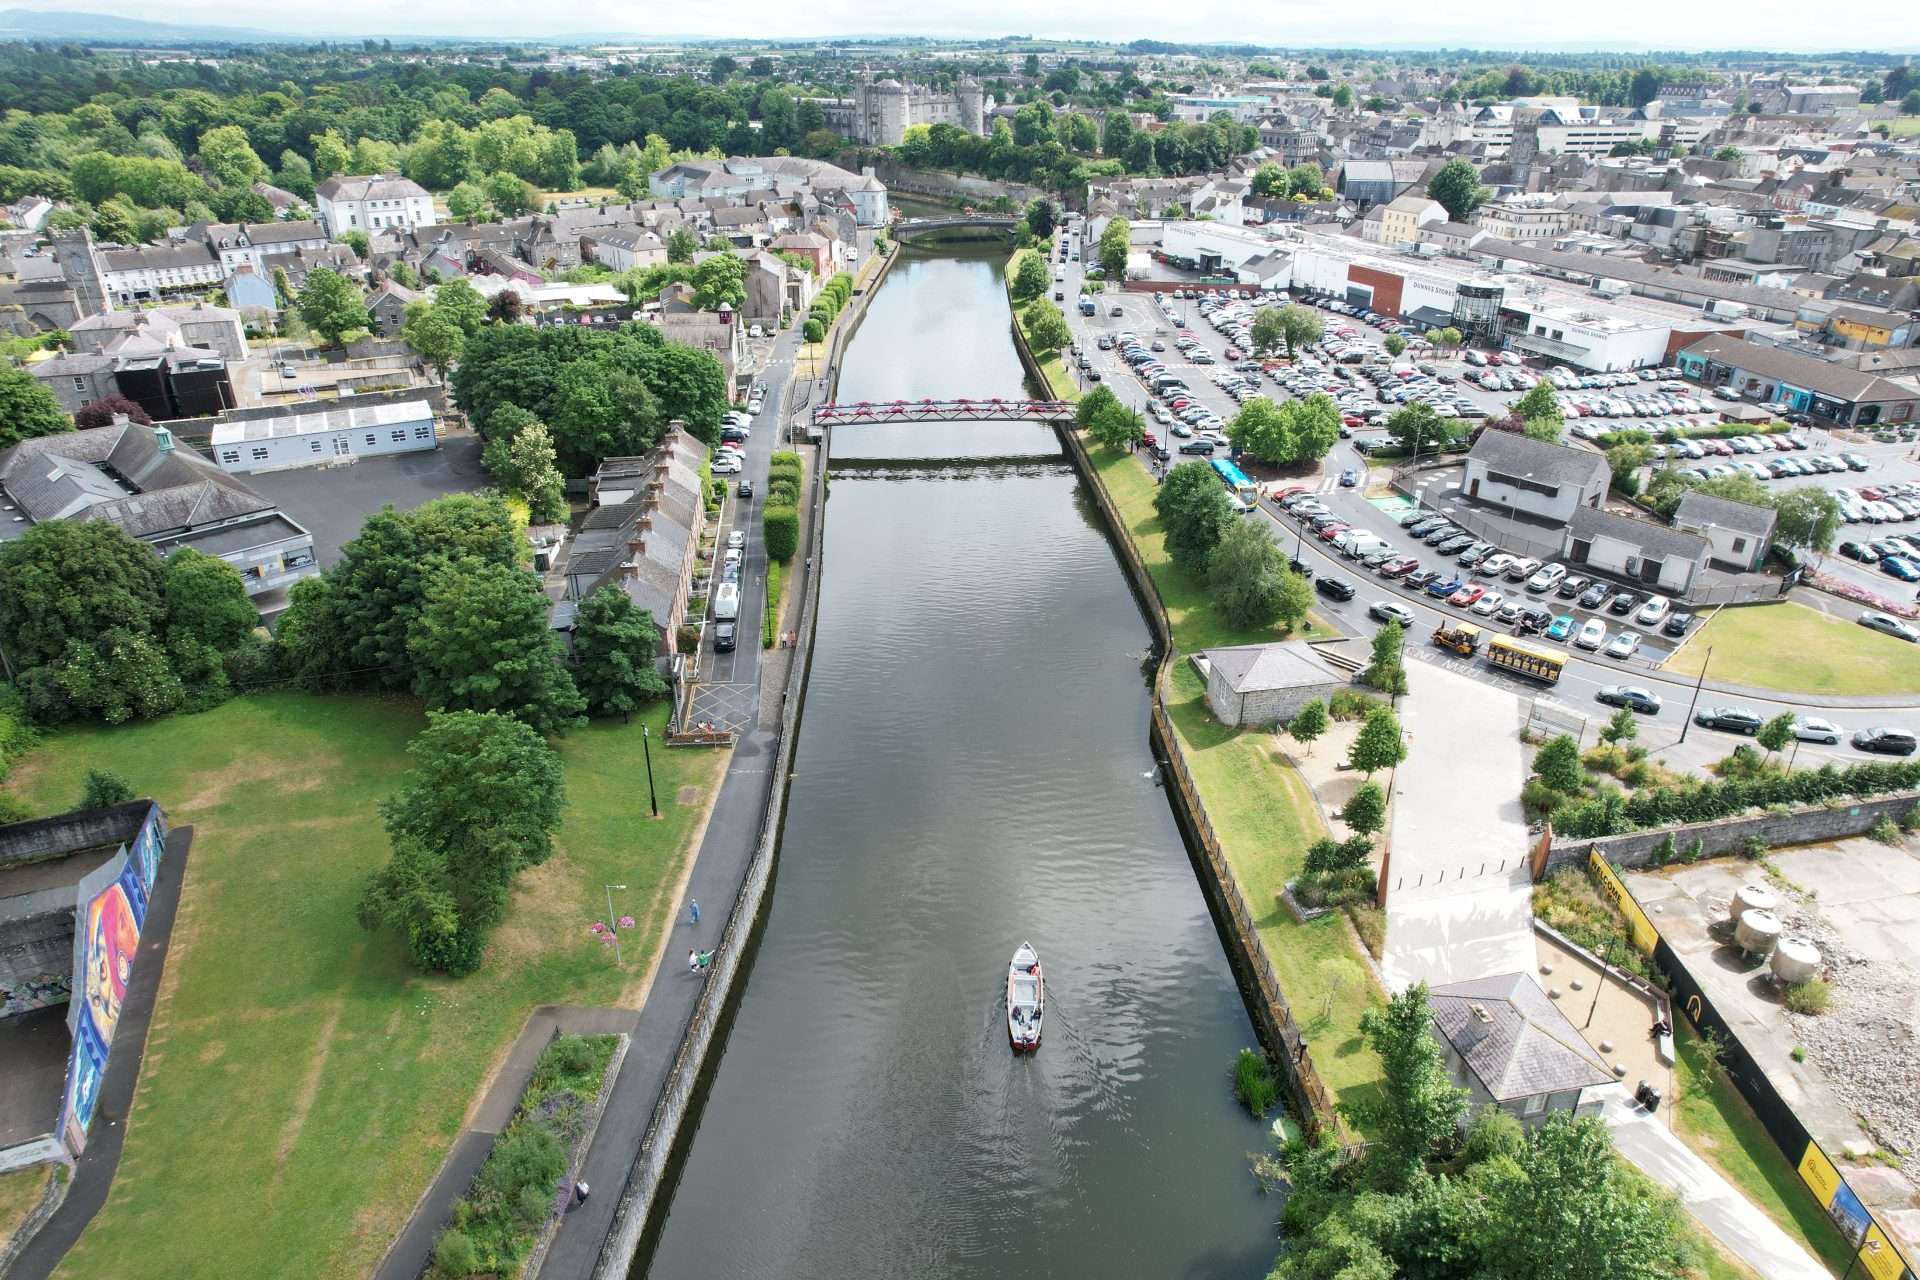 Arial view of river Nore and Kilkenny City